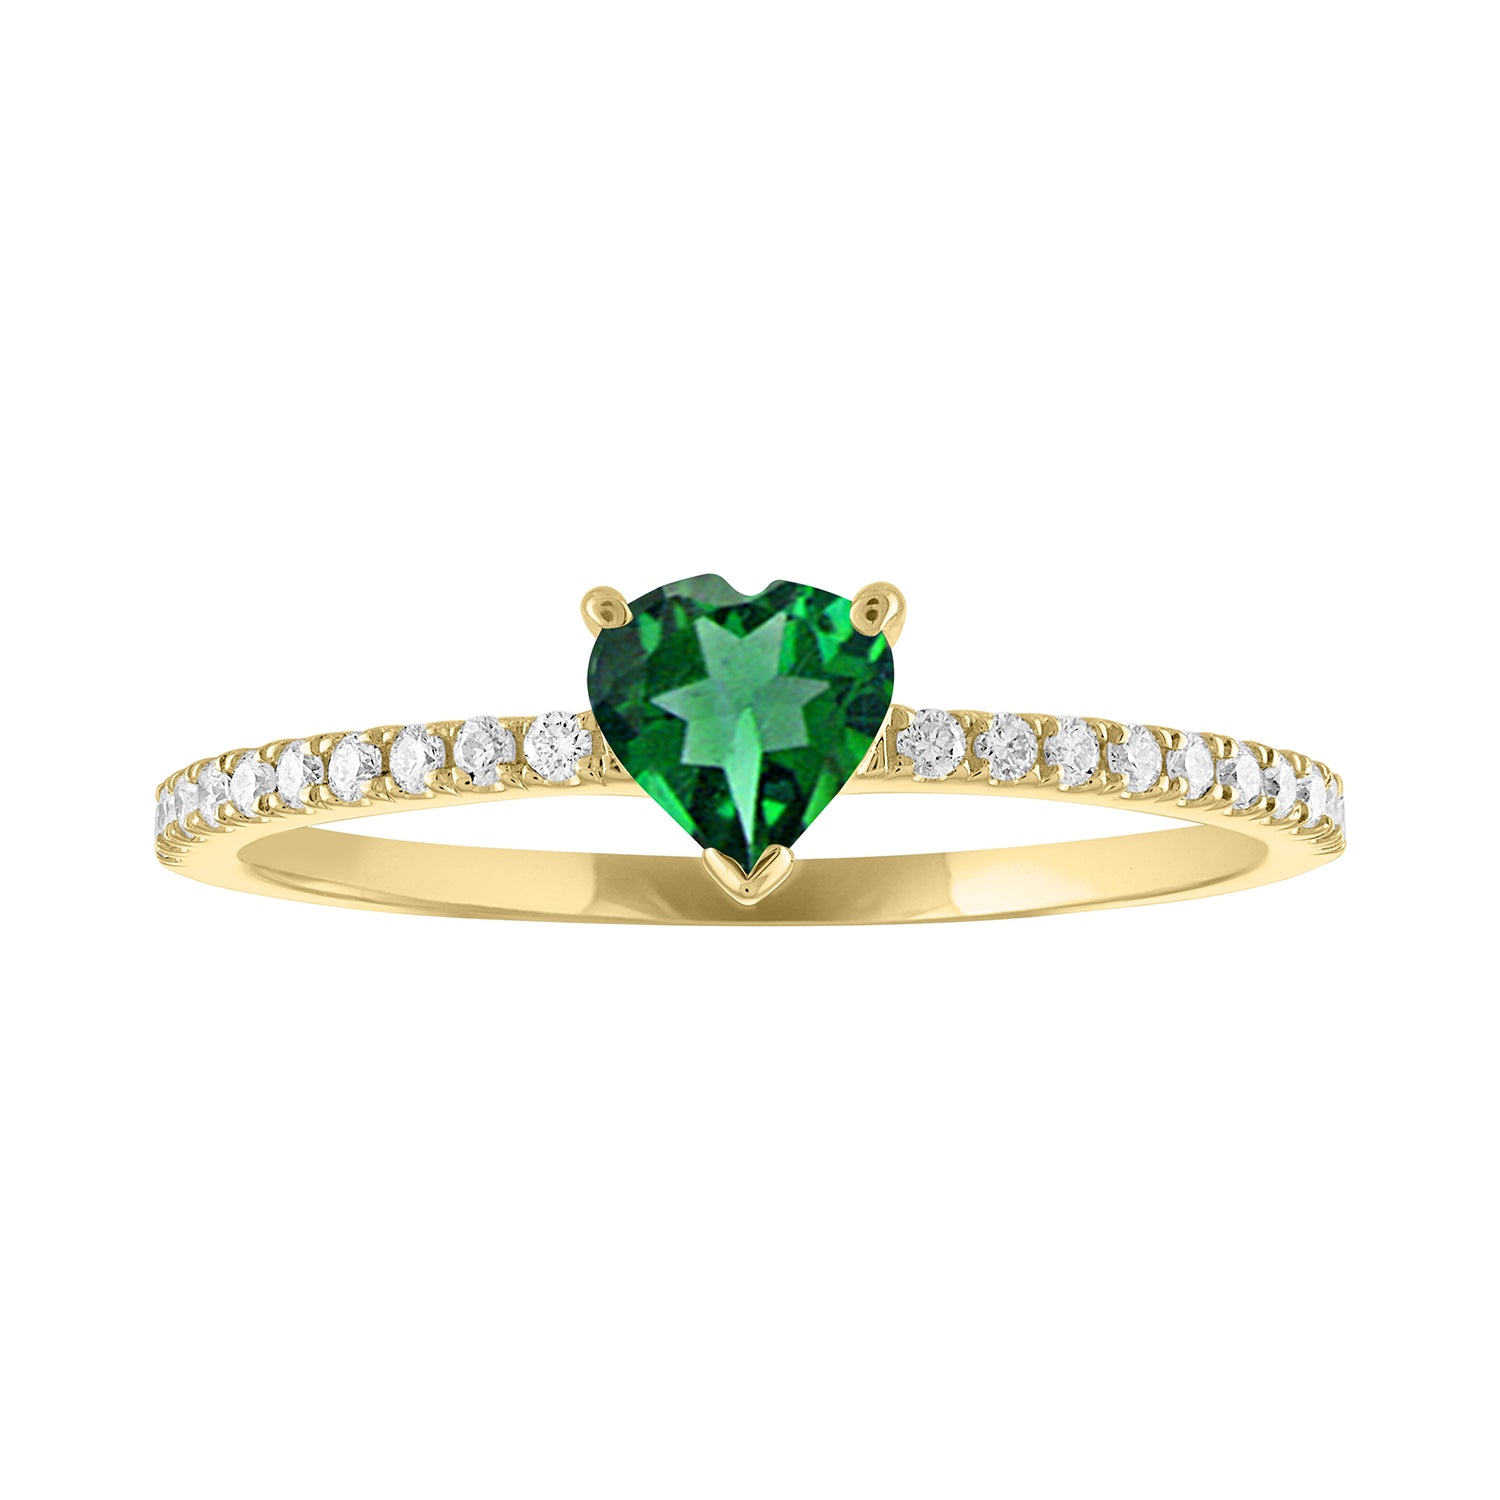 Thin banned yellow gold ring with heart shaped emerald and round diamonds on the shank